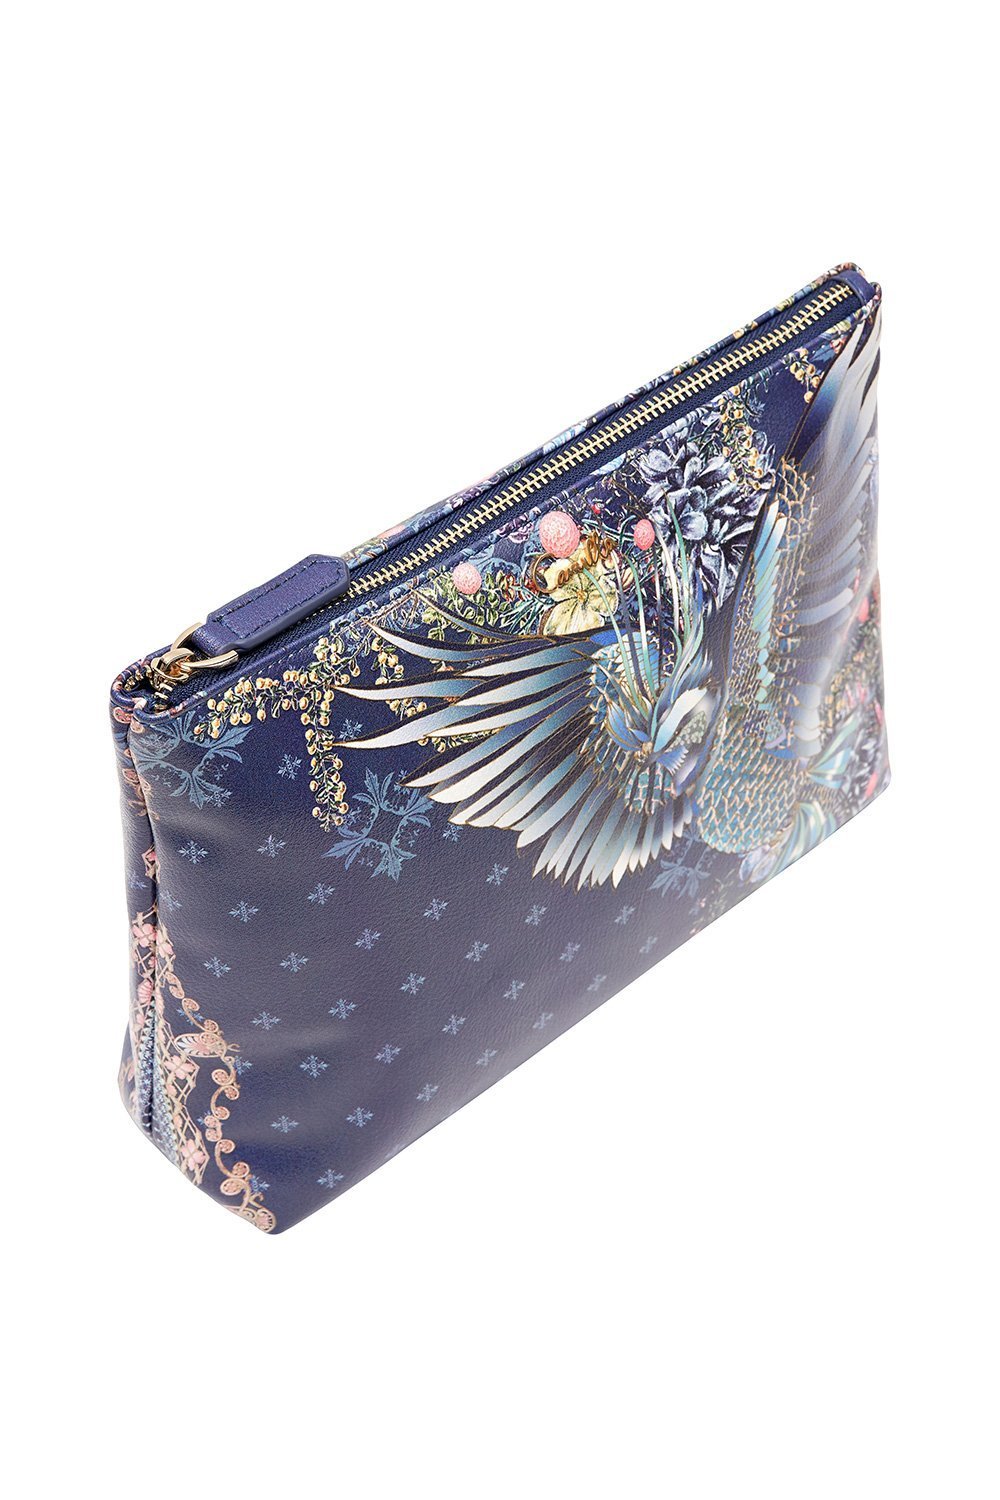 LARGE MAKEUP POUCH SOUTHERN TWILIGHT